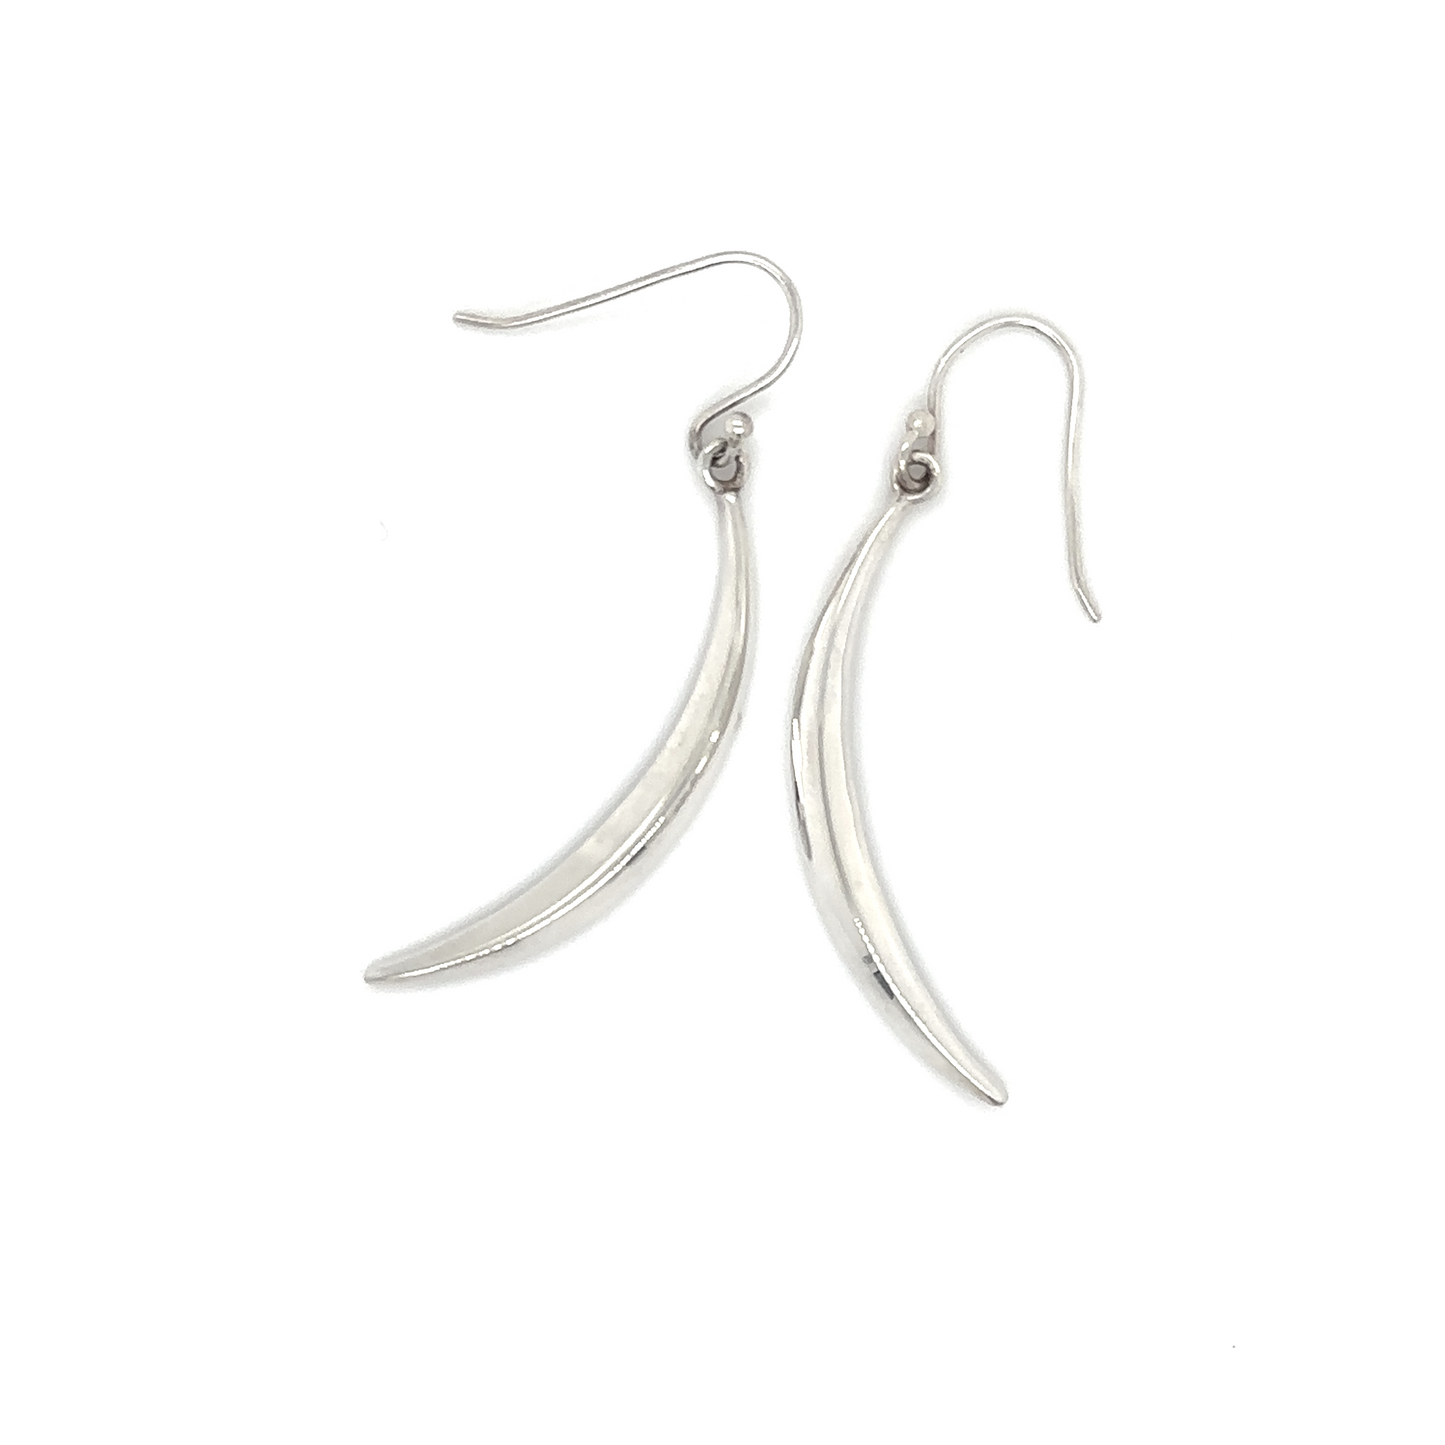 A pair of Super Silver Crescent Moon earrings with a crescent shape.